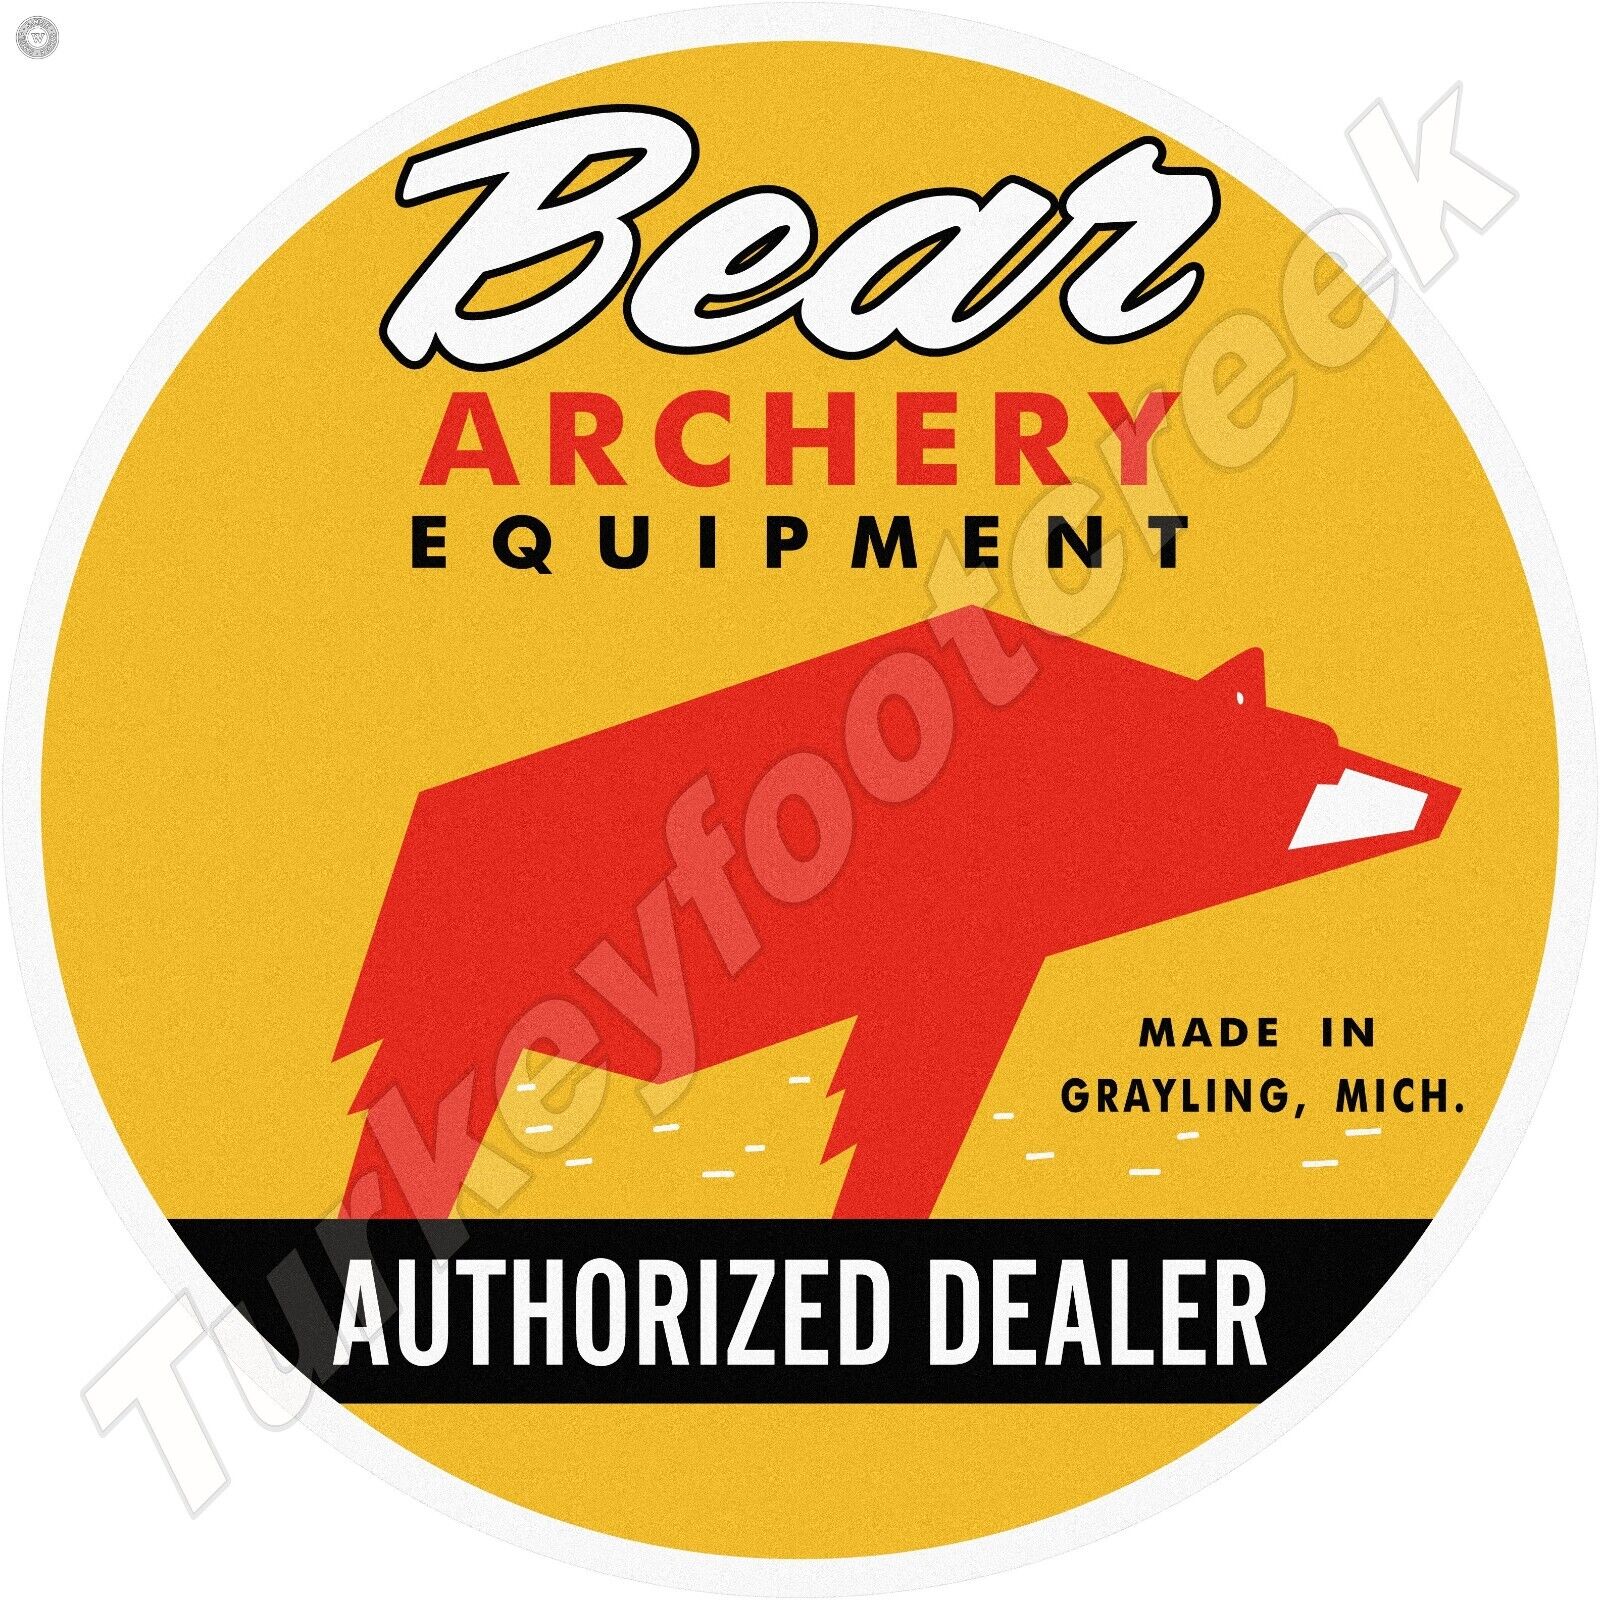 Bear Archery Equipment Authorized Dealer Round Metal Sign 2 Sizes To Choose From